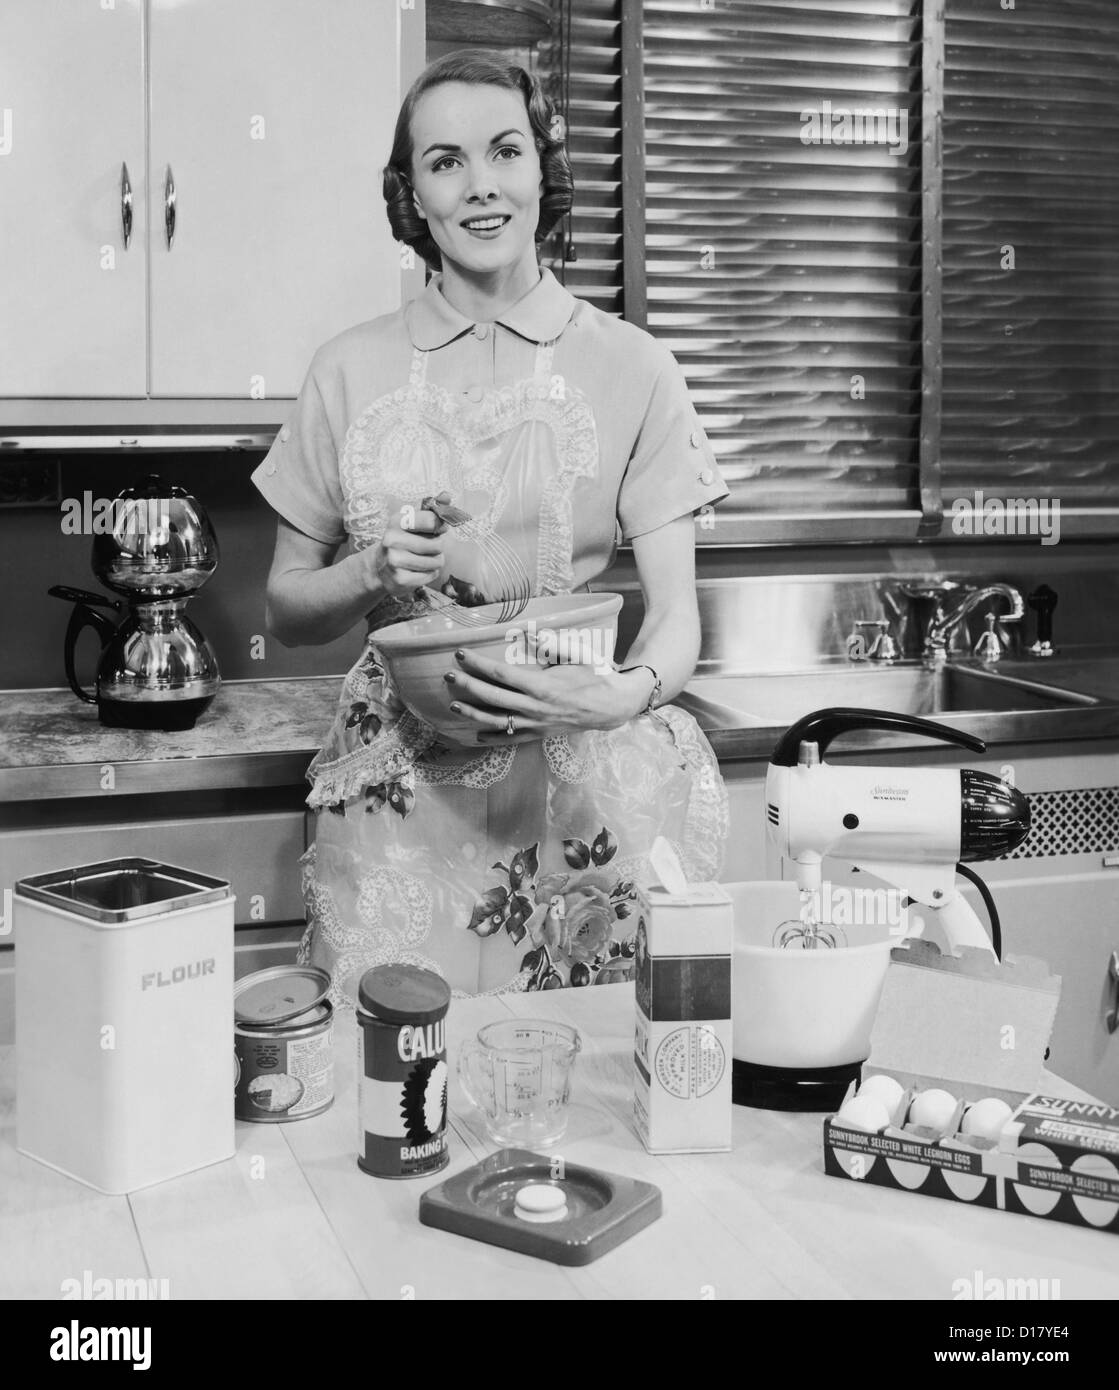 Woman with apron baking in her kitchen Stock Photo